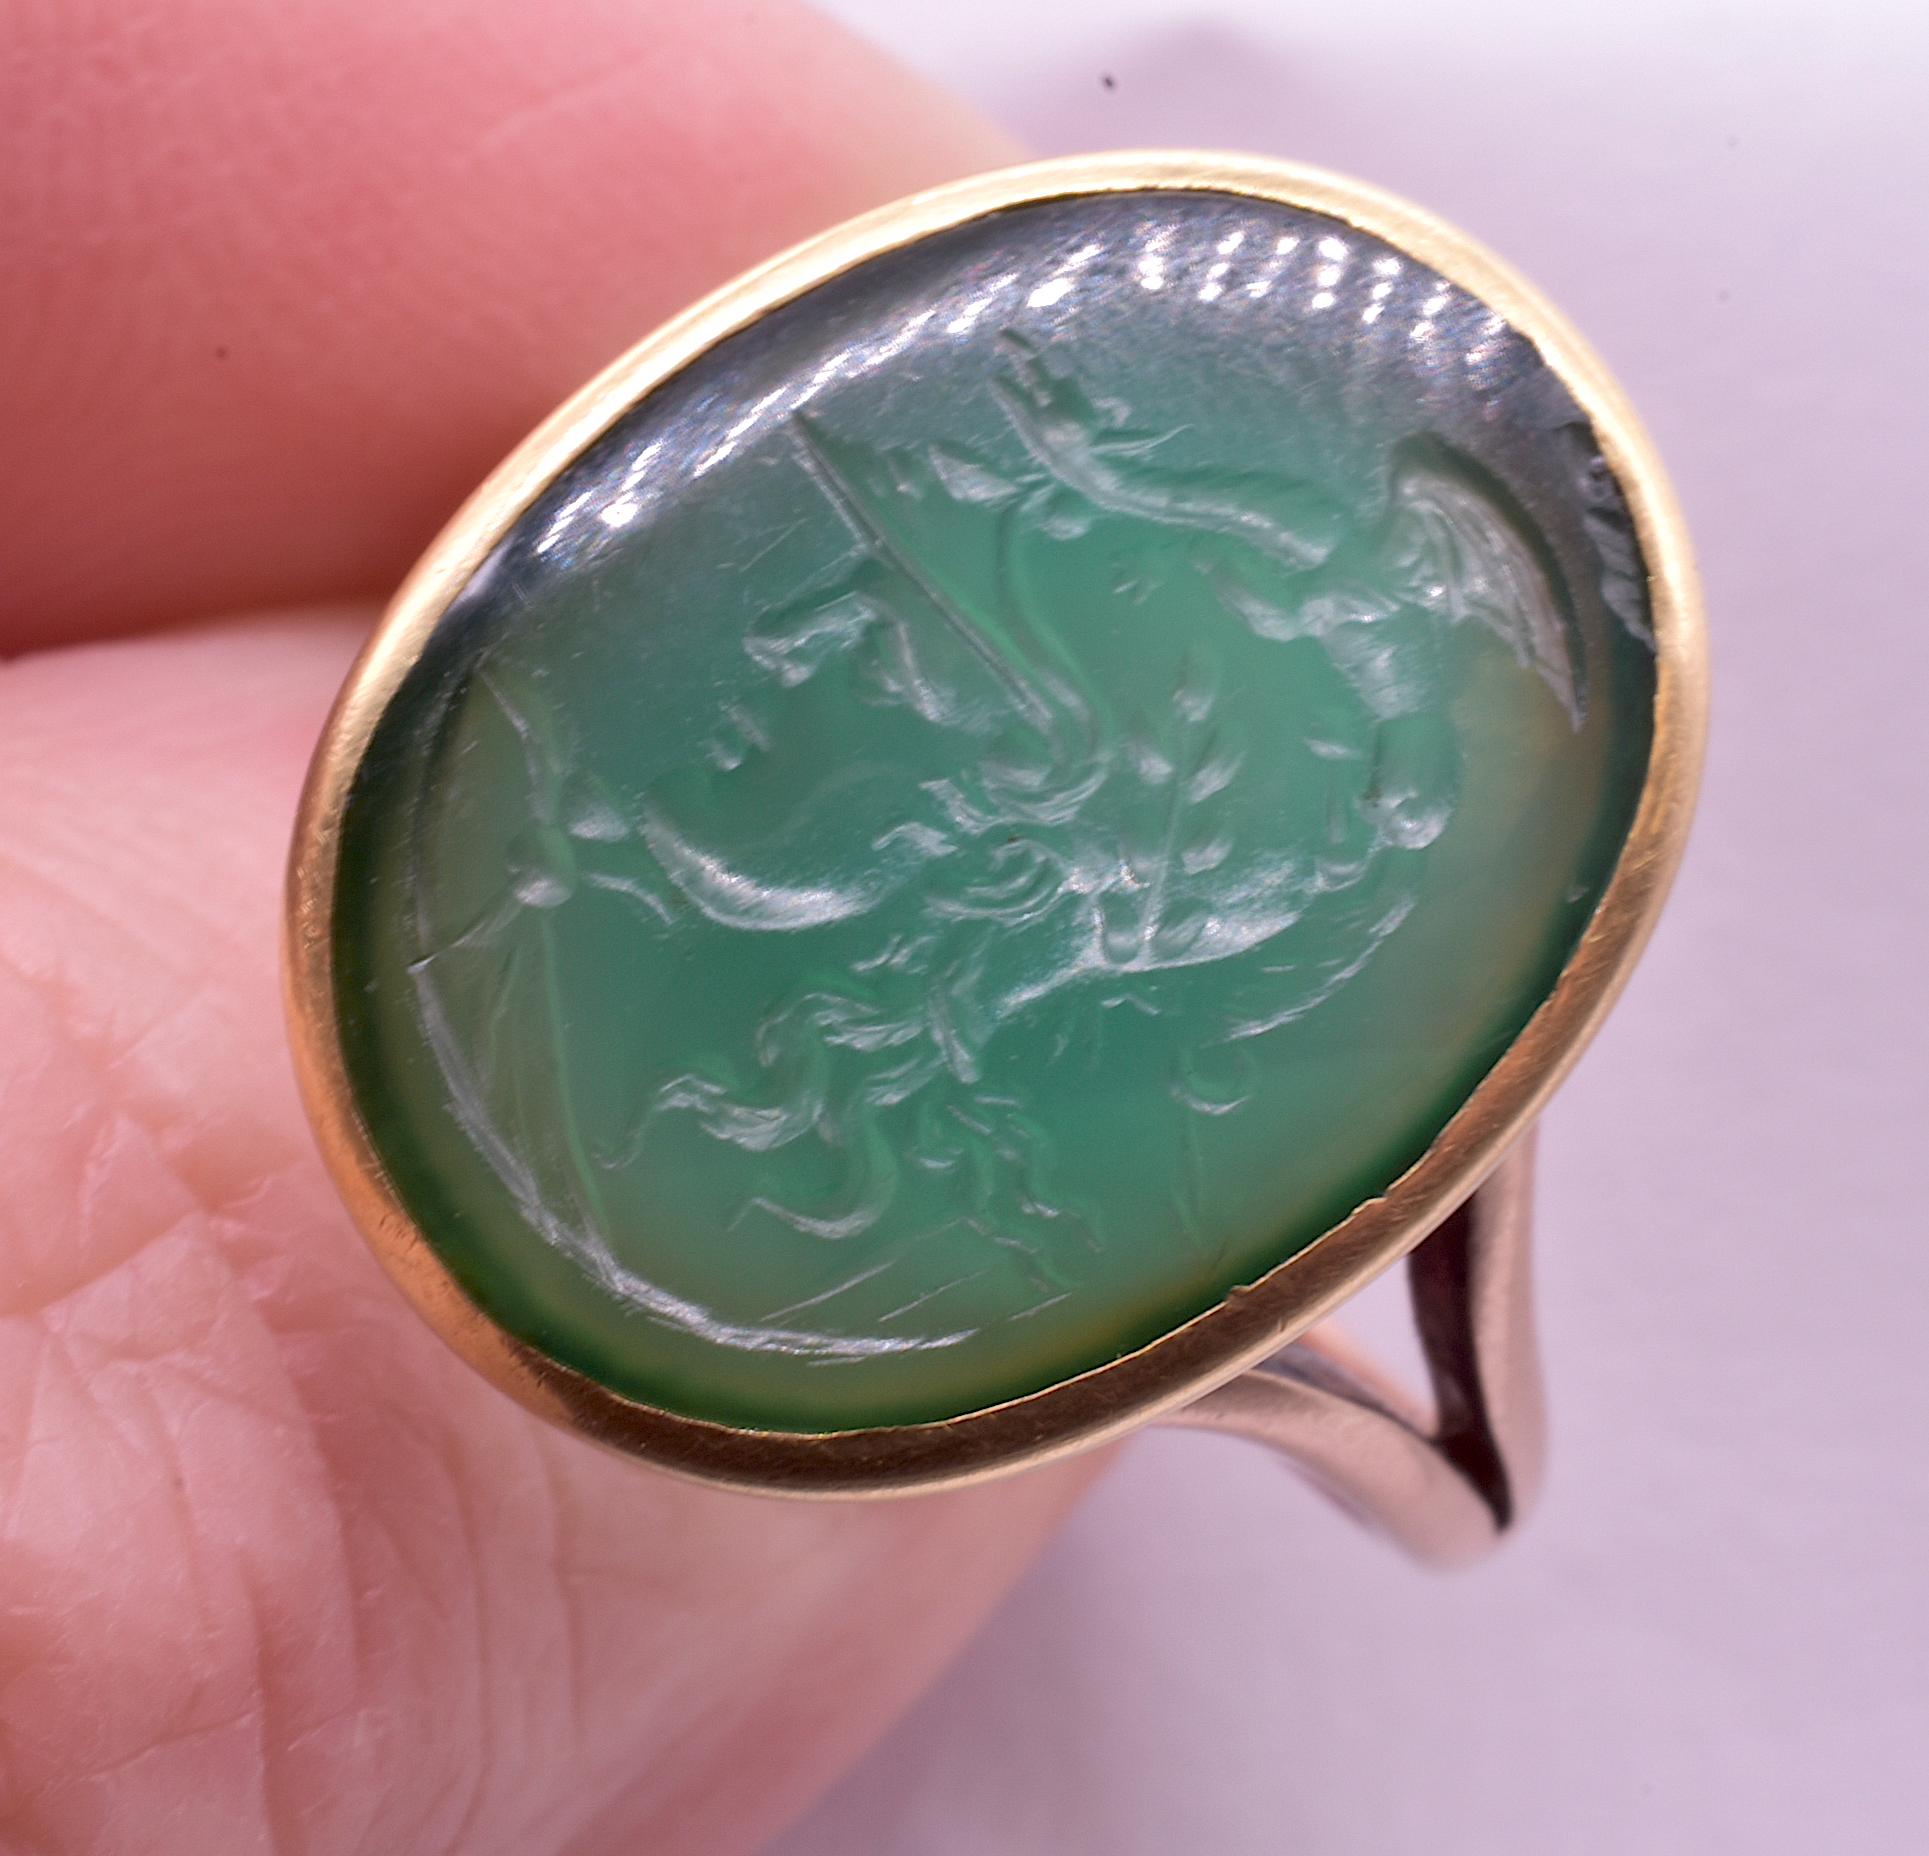 Victorian C1860 Agate Signet Ring of Bust of Helmeted Warrior, Probably Menelaus